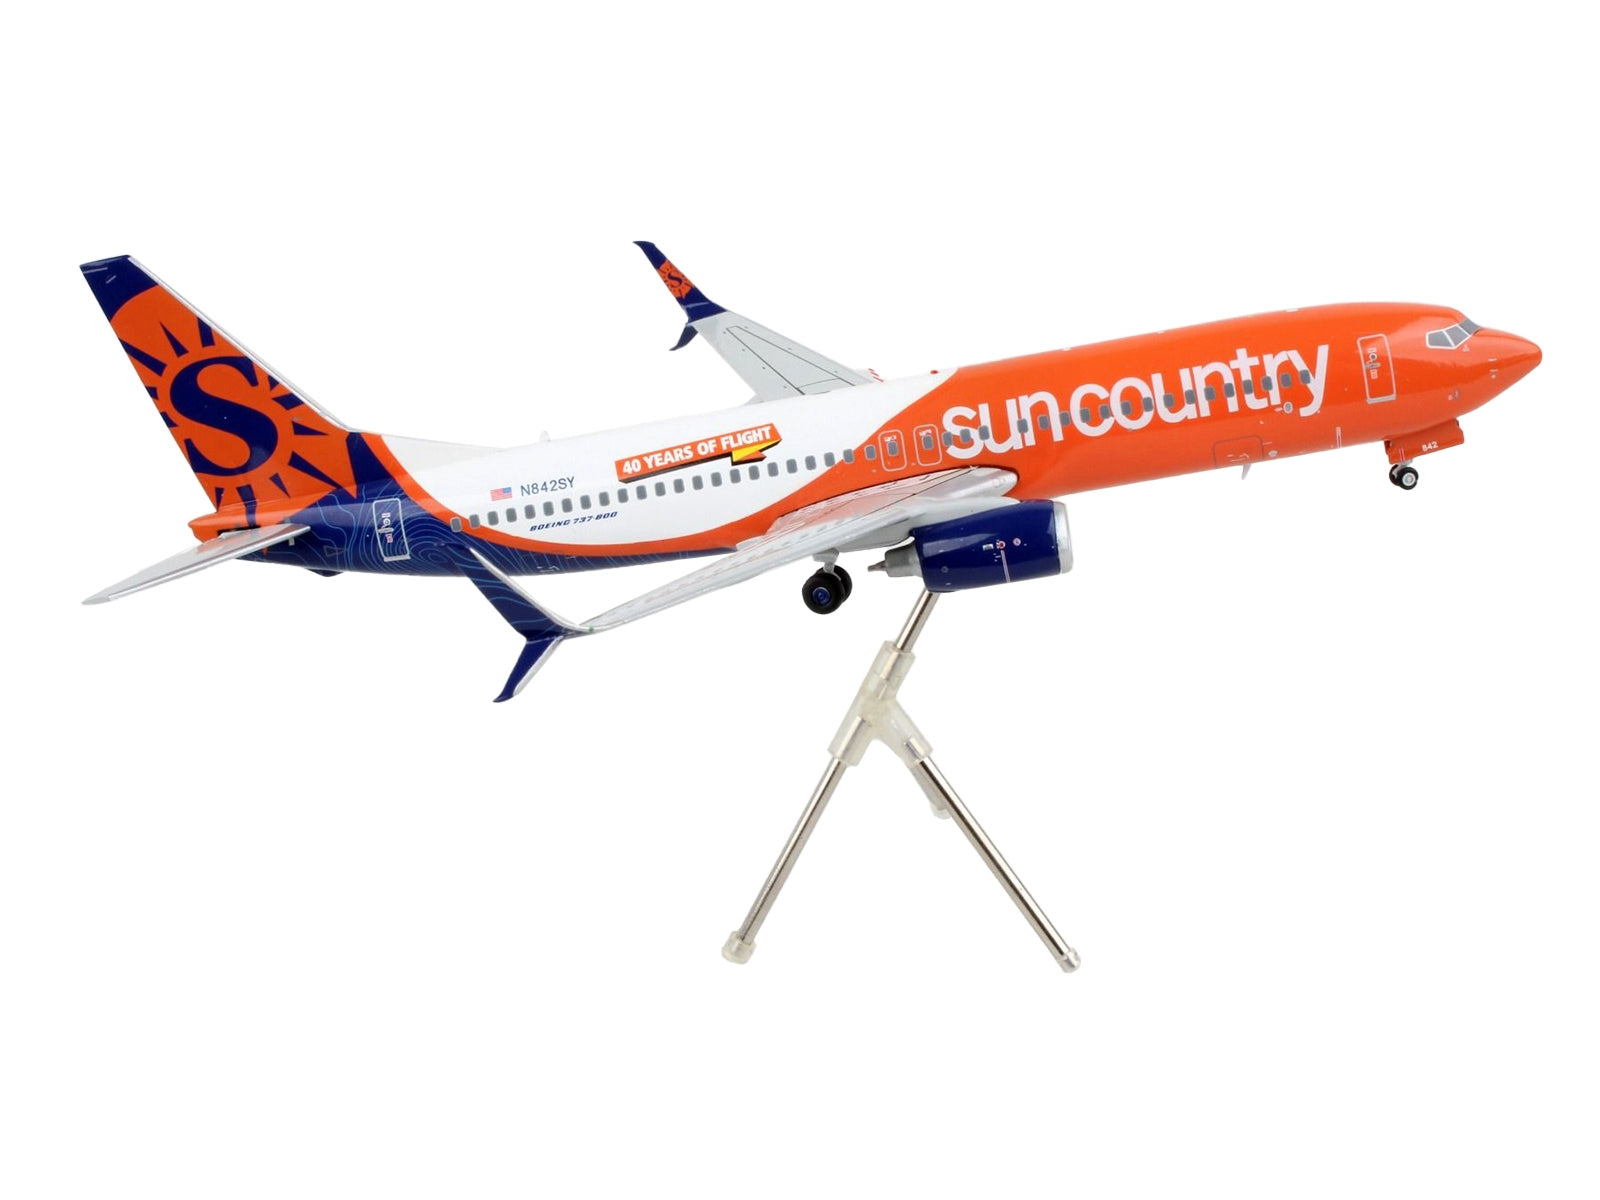 Boeing 737-800 Commercial Aircraft "Sun Country Airlines" Orange and White "Gemini 200" Series 1/200 Diecast Model Airplane by GeminiJets